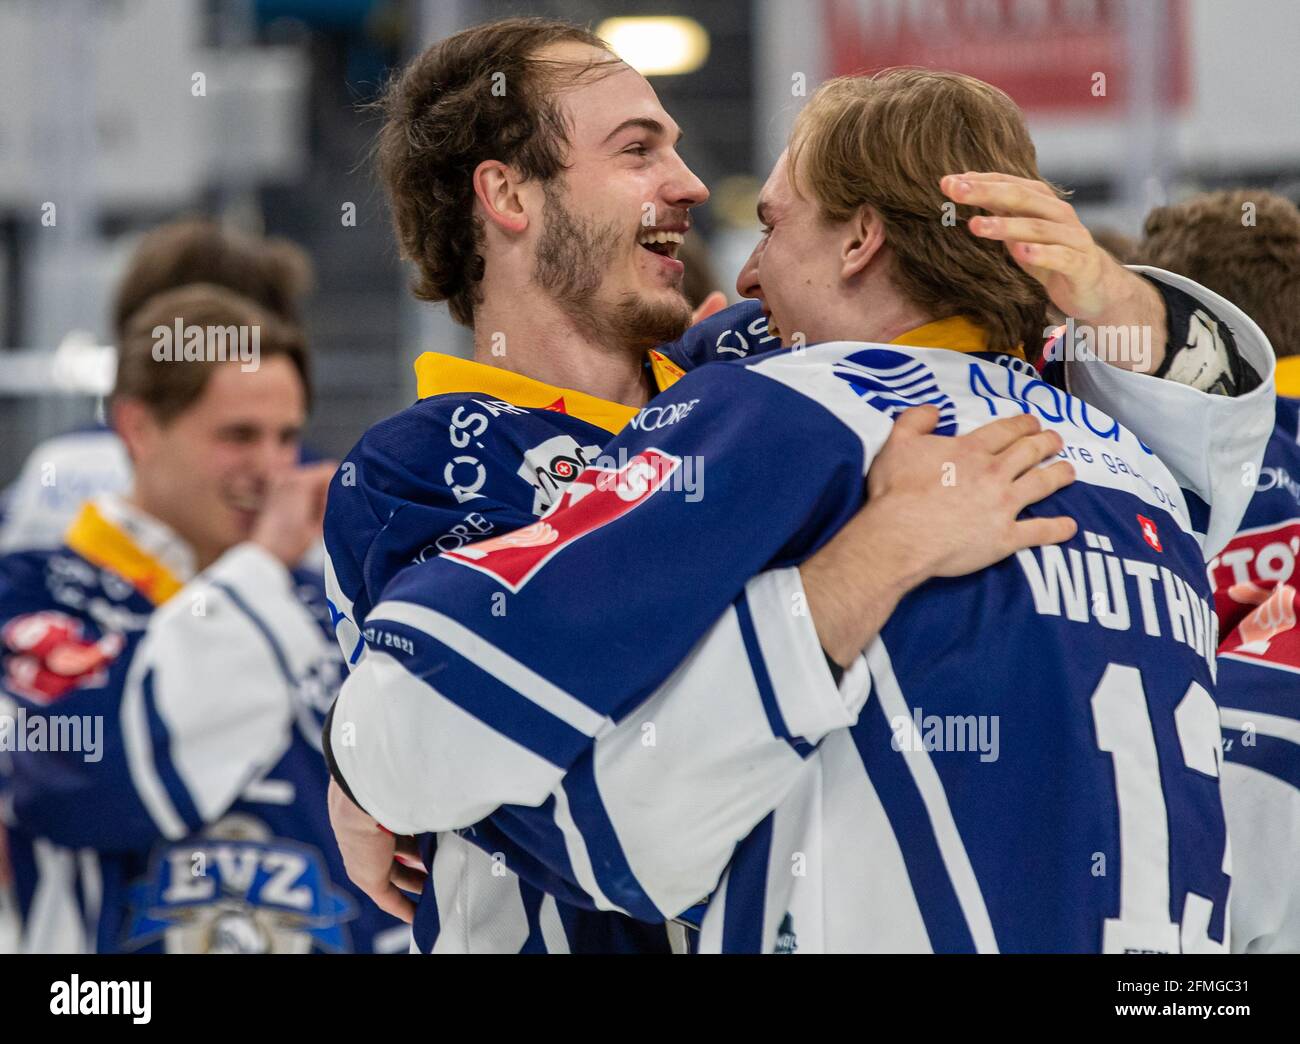 Nico Gross # 66 (EV Zug) celebrates with Dario Wuethrich # 13 (EV Zug) during the National League Playoff Final ice hockey game 3 between EV Zug and Geneve-Servette HC on May